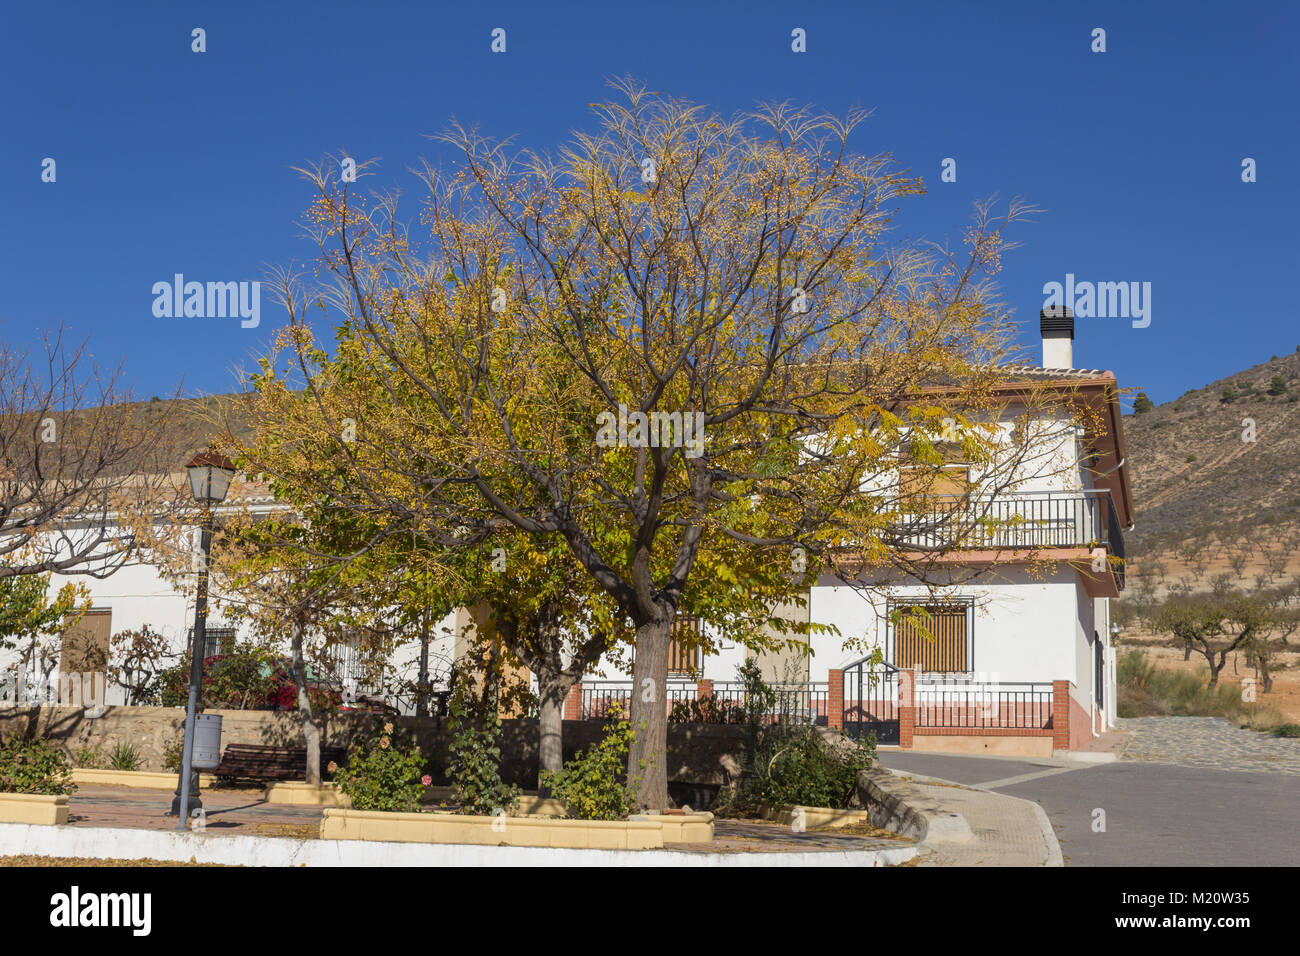 Row of Typical Family Homes in a Small Rural Spanish Town in Almeria Province Andalucía Spain Stock Photo